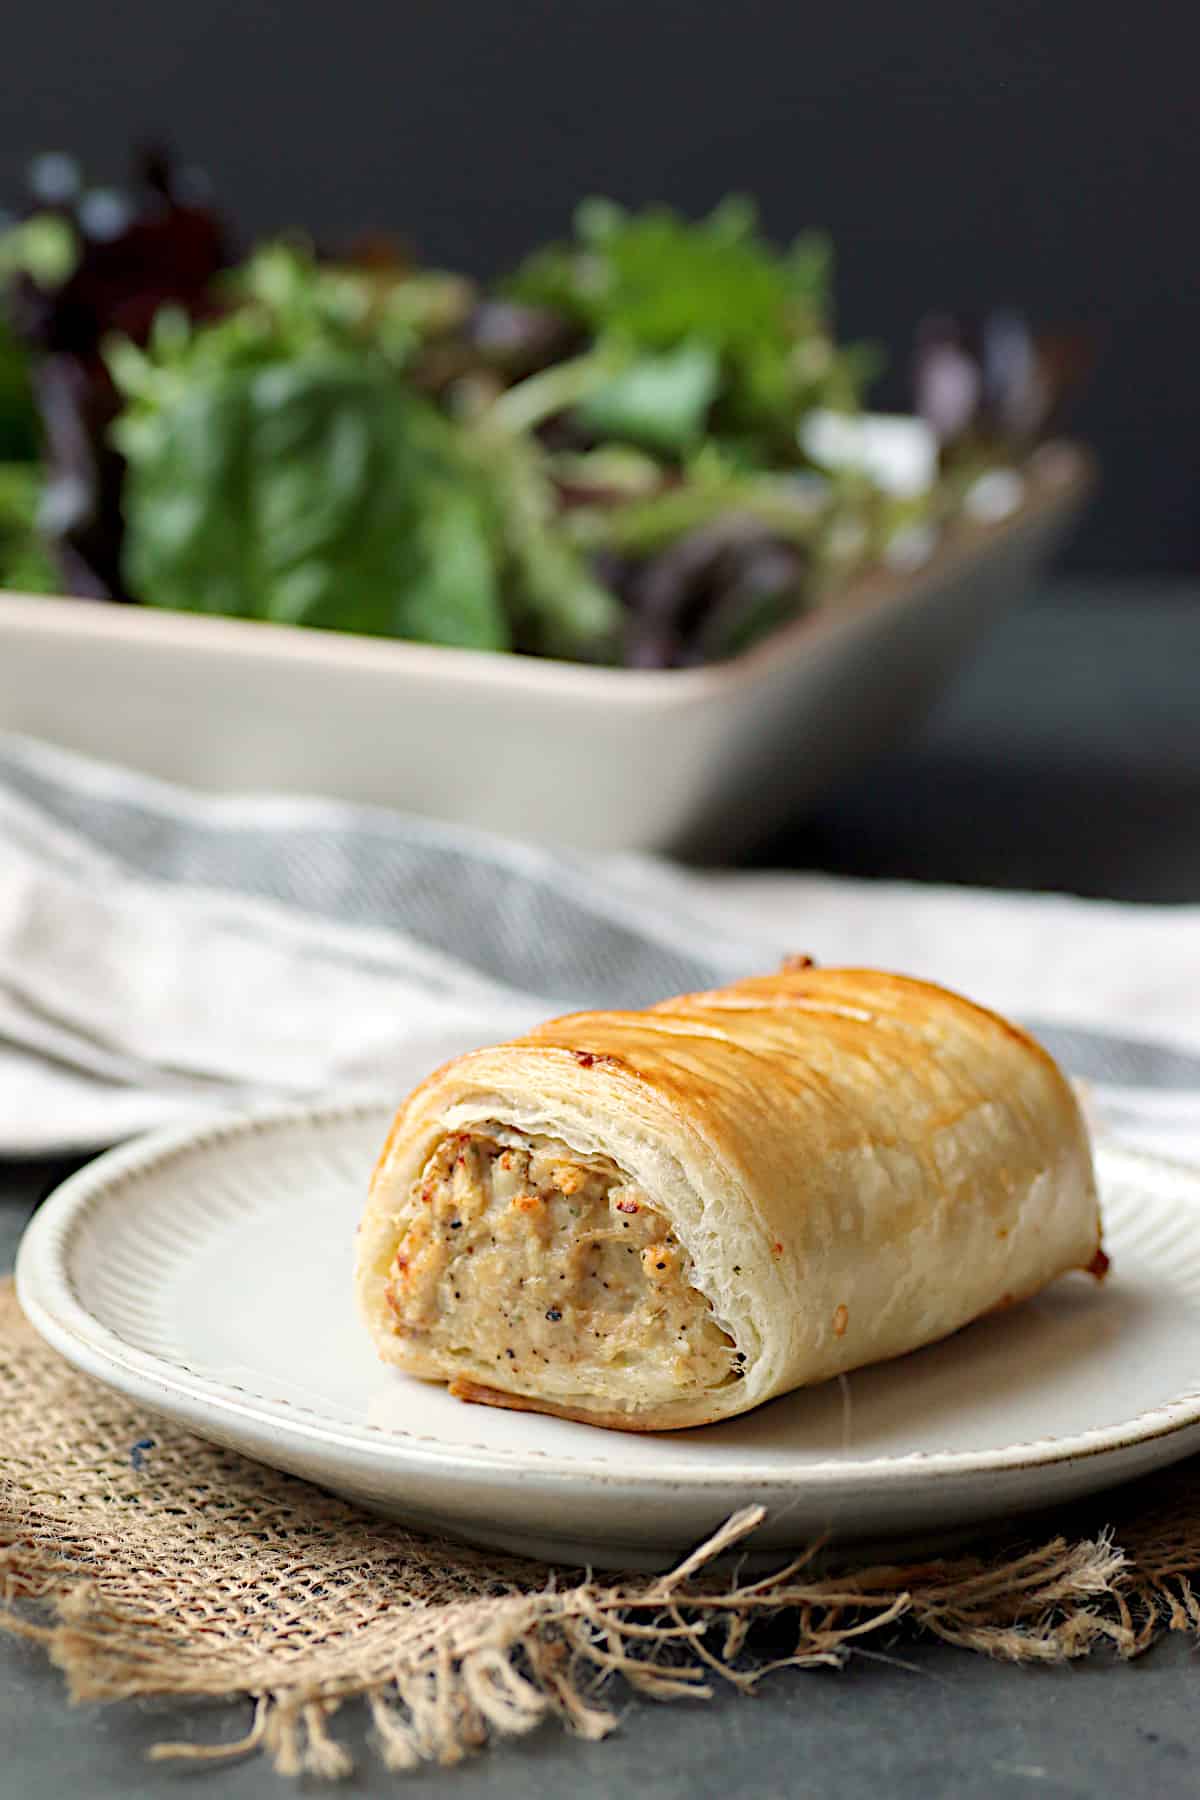 A singer larger snack-sized sausage roll on a white plate.